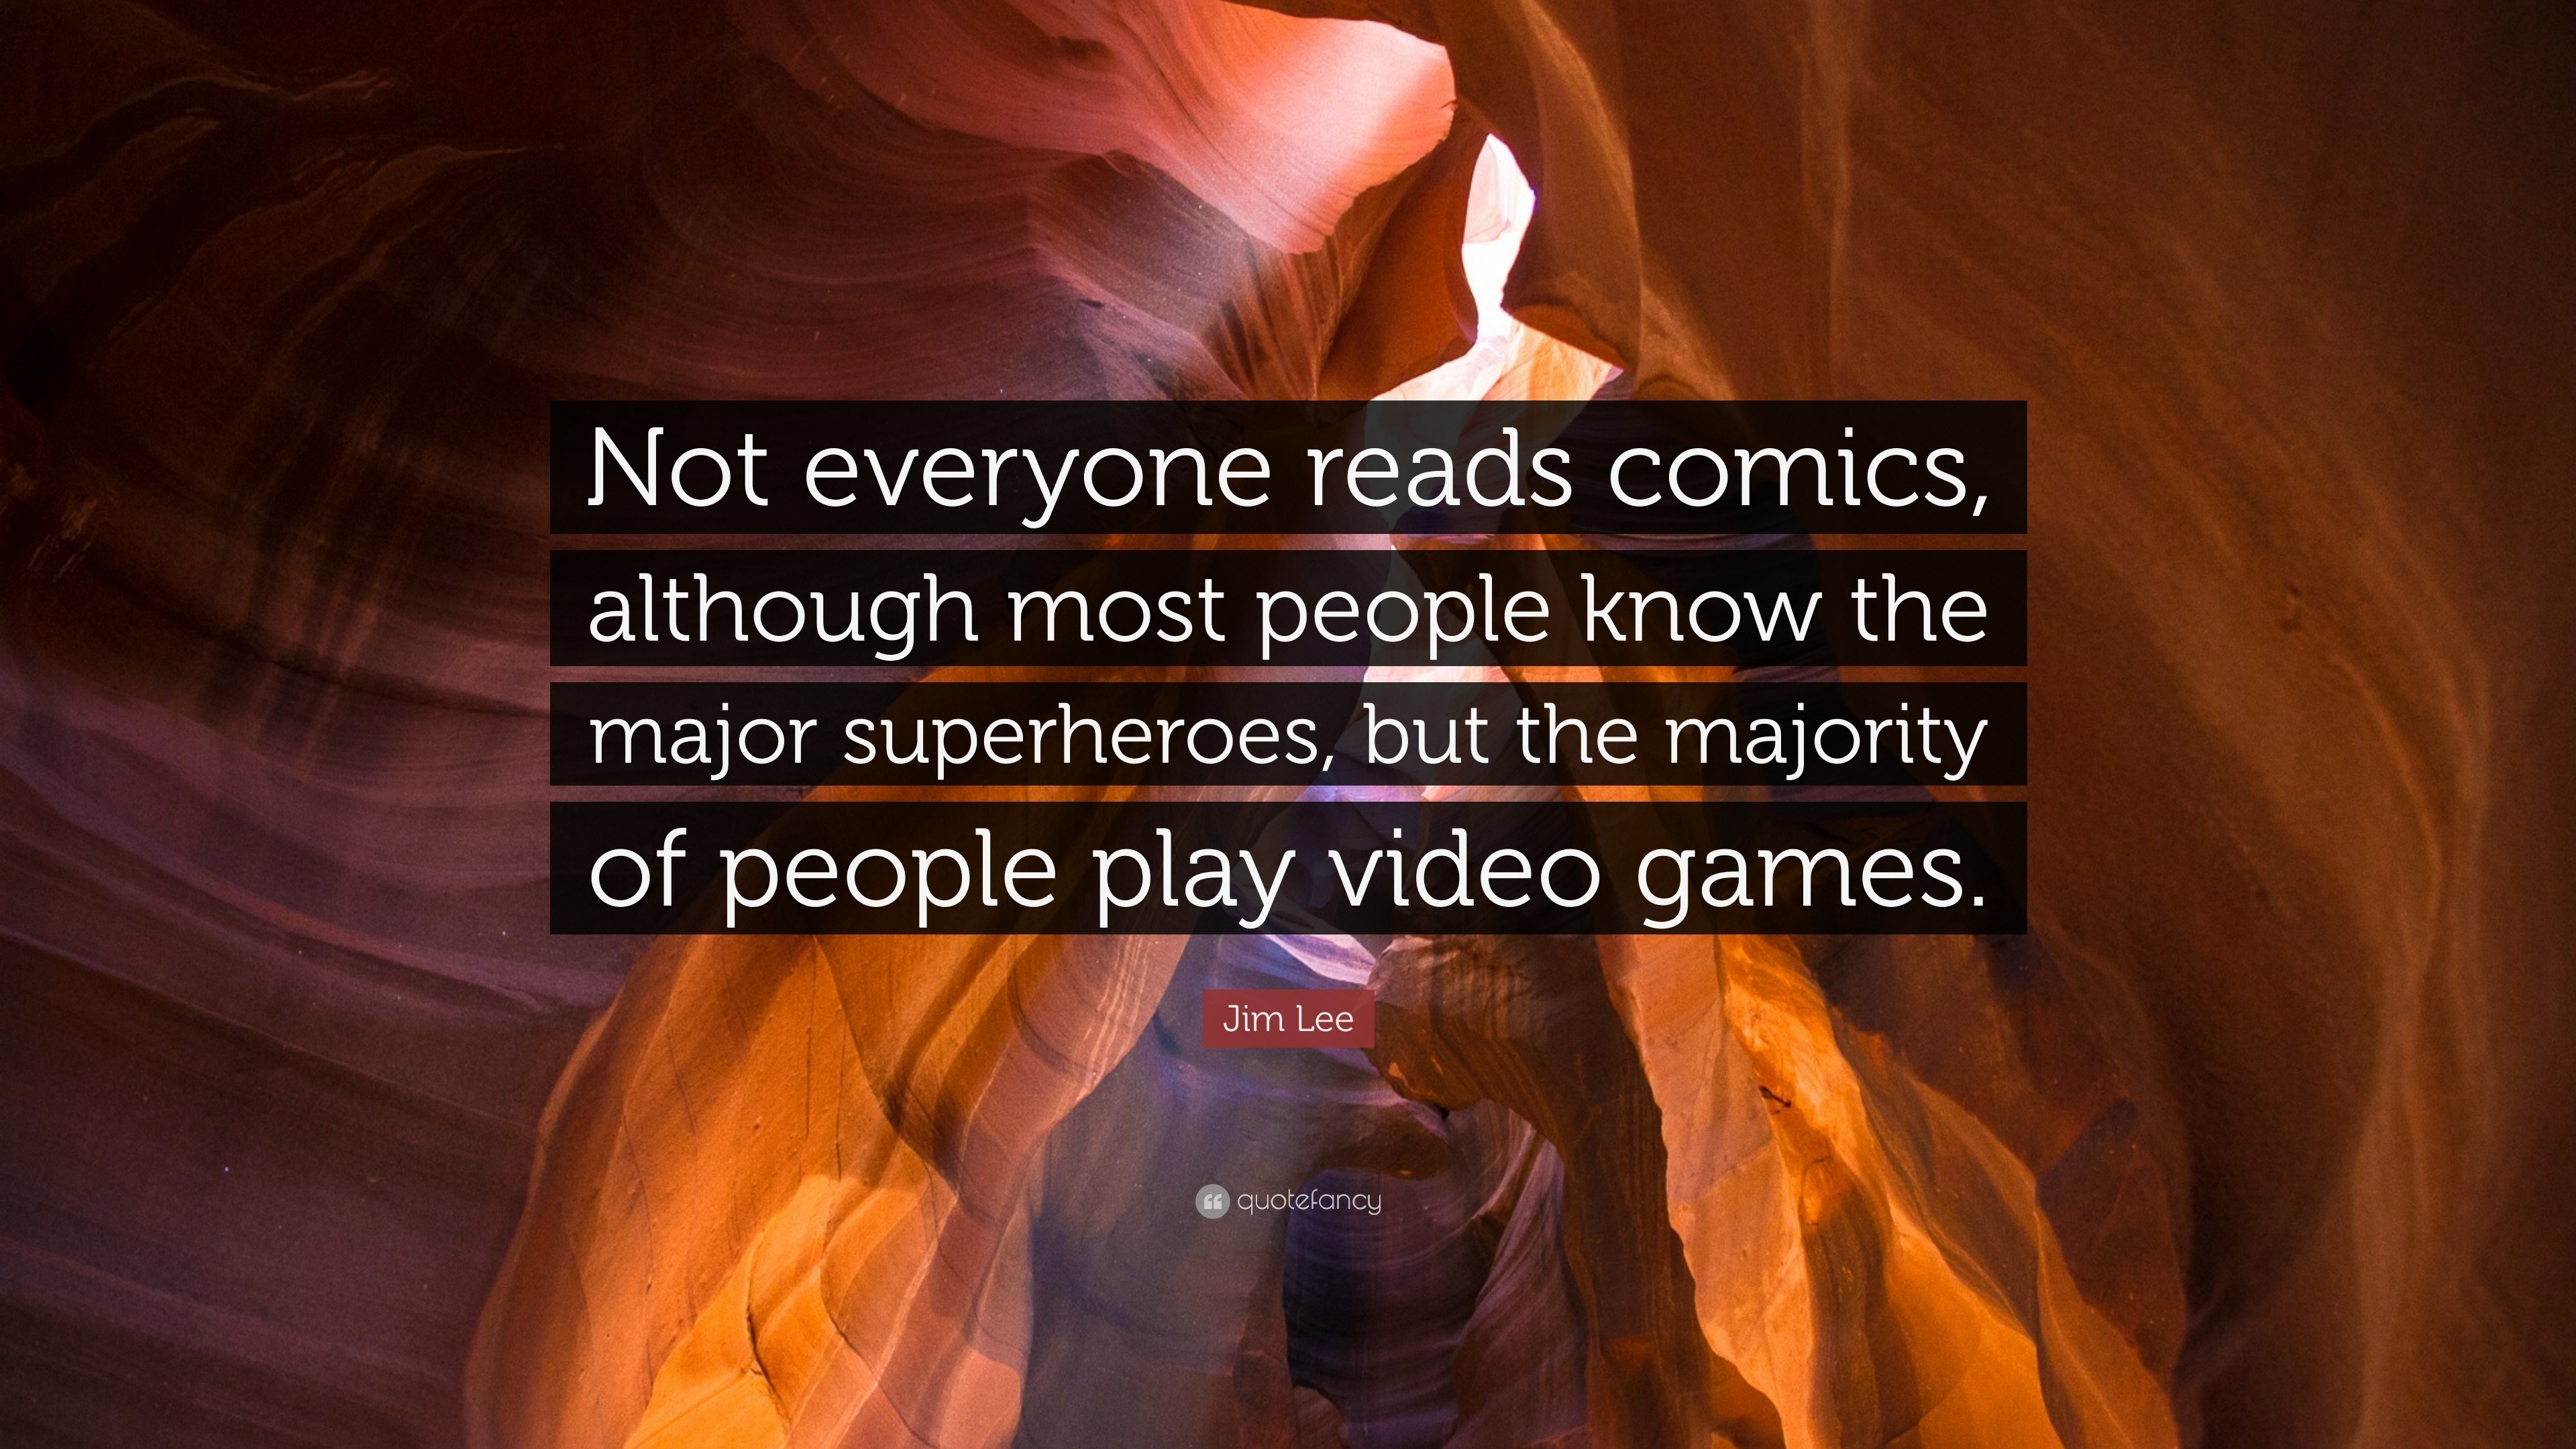 The comics about people who play videogames